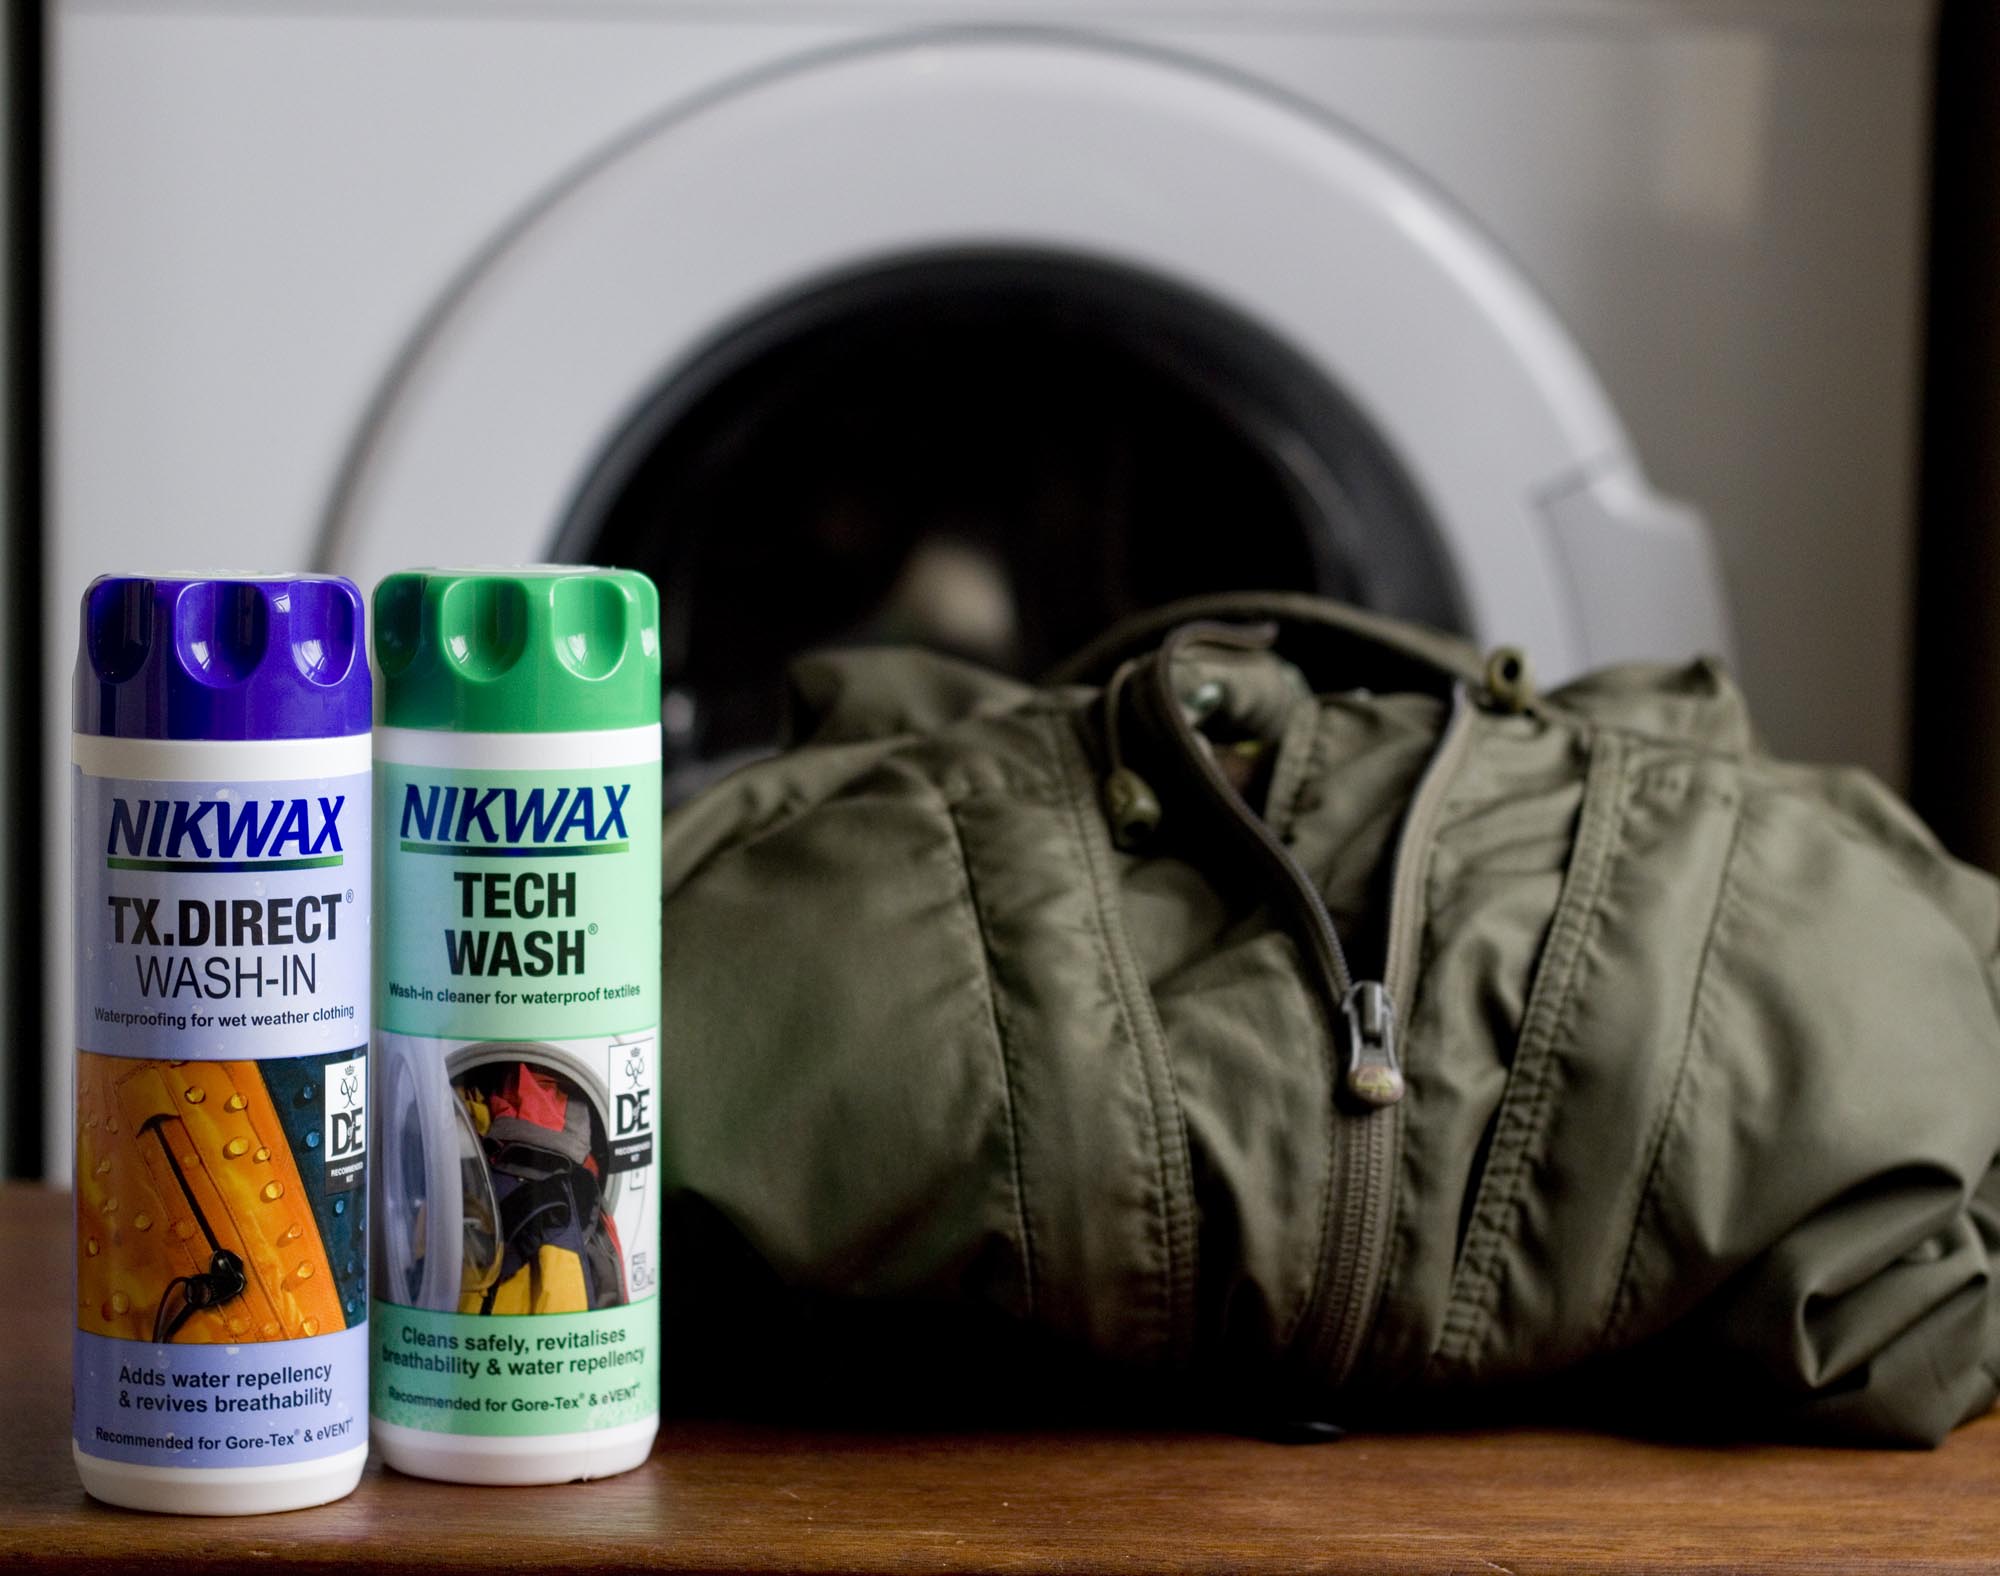 [5 Loads] Concentrated Technical Gear Wash Performance Detergent for Renewed Clothing Appearance - Concentrated & Safe Jacket Detergent to Maintain